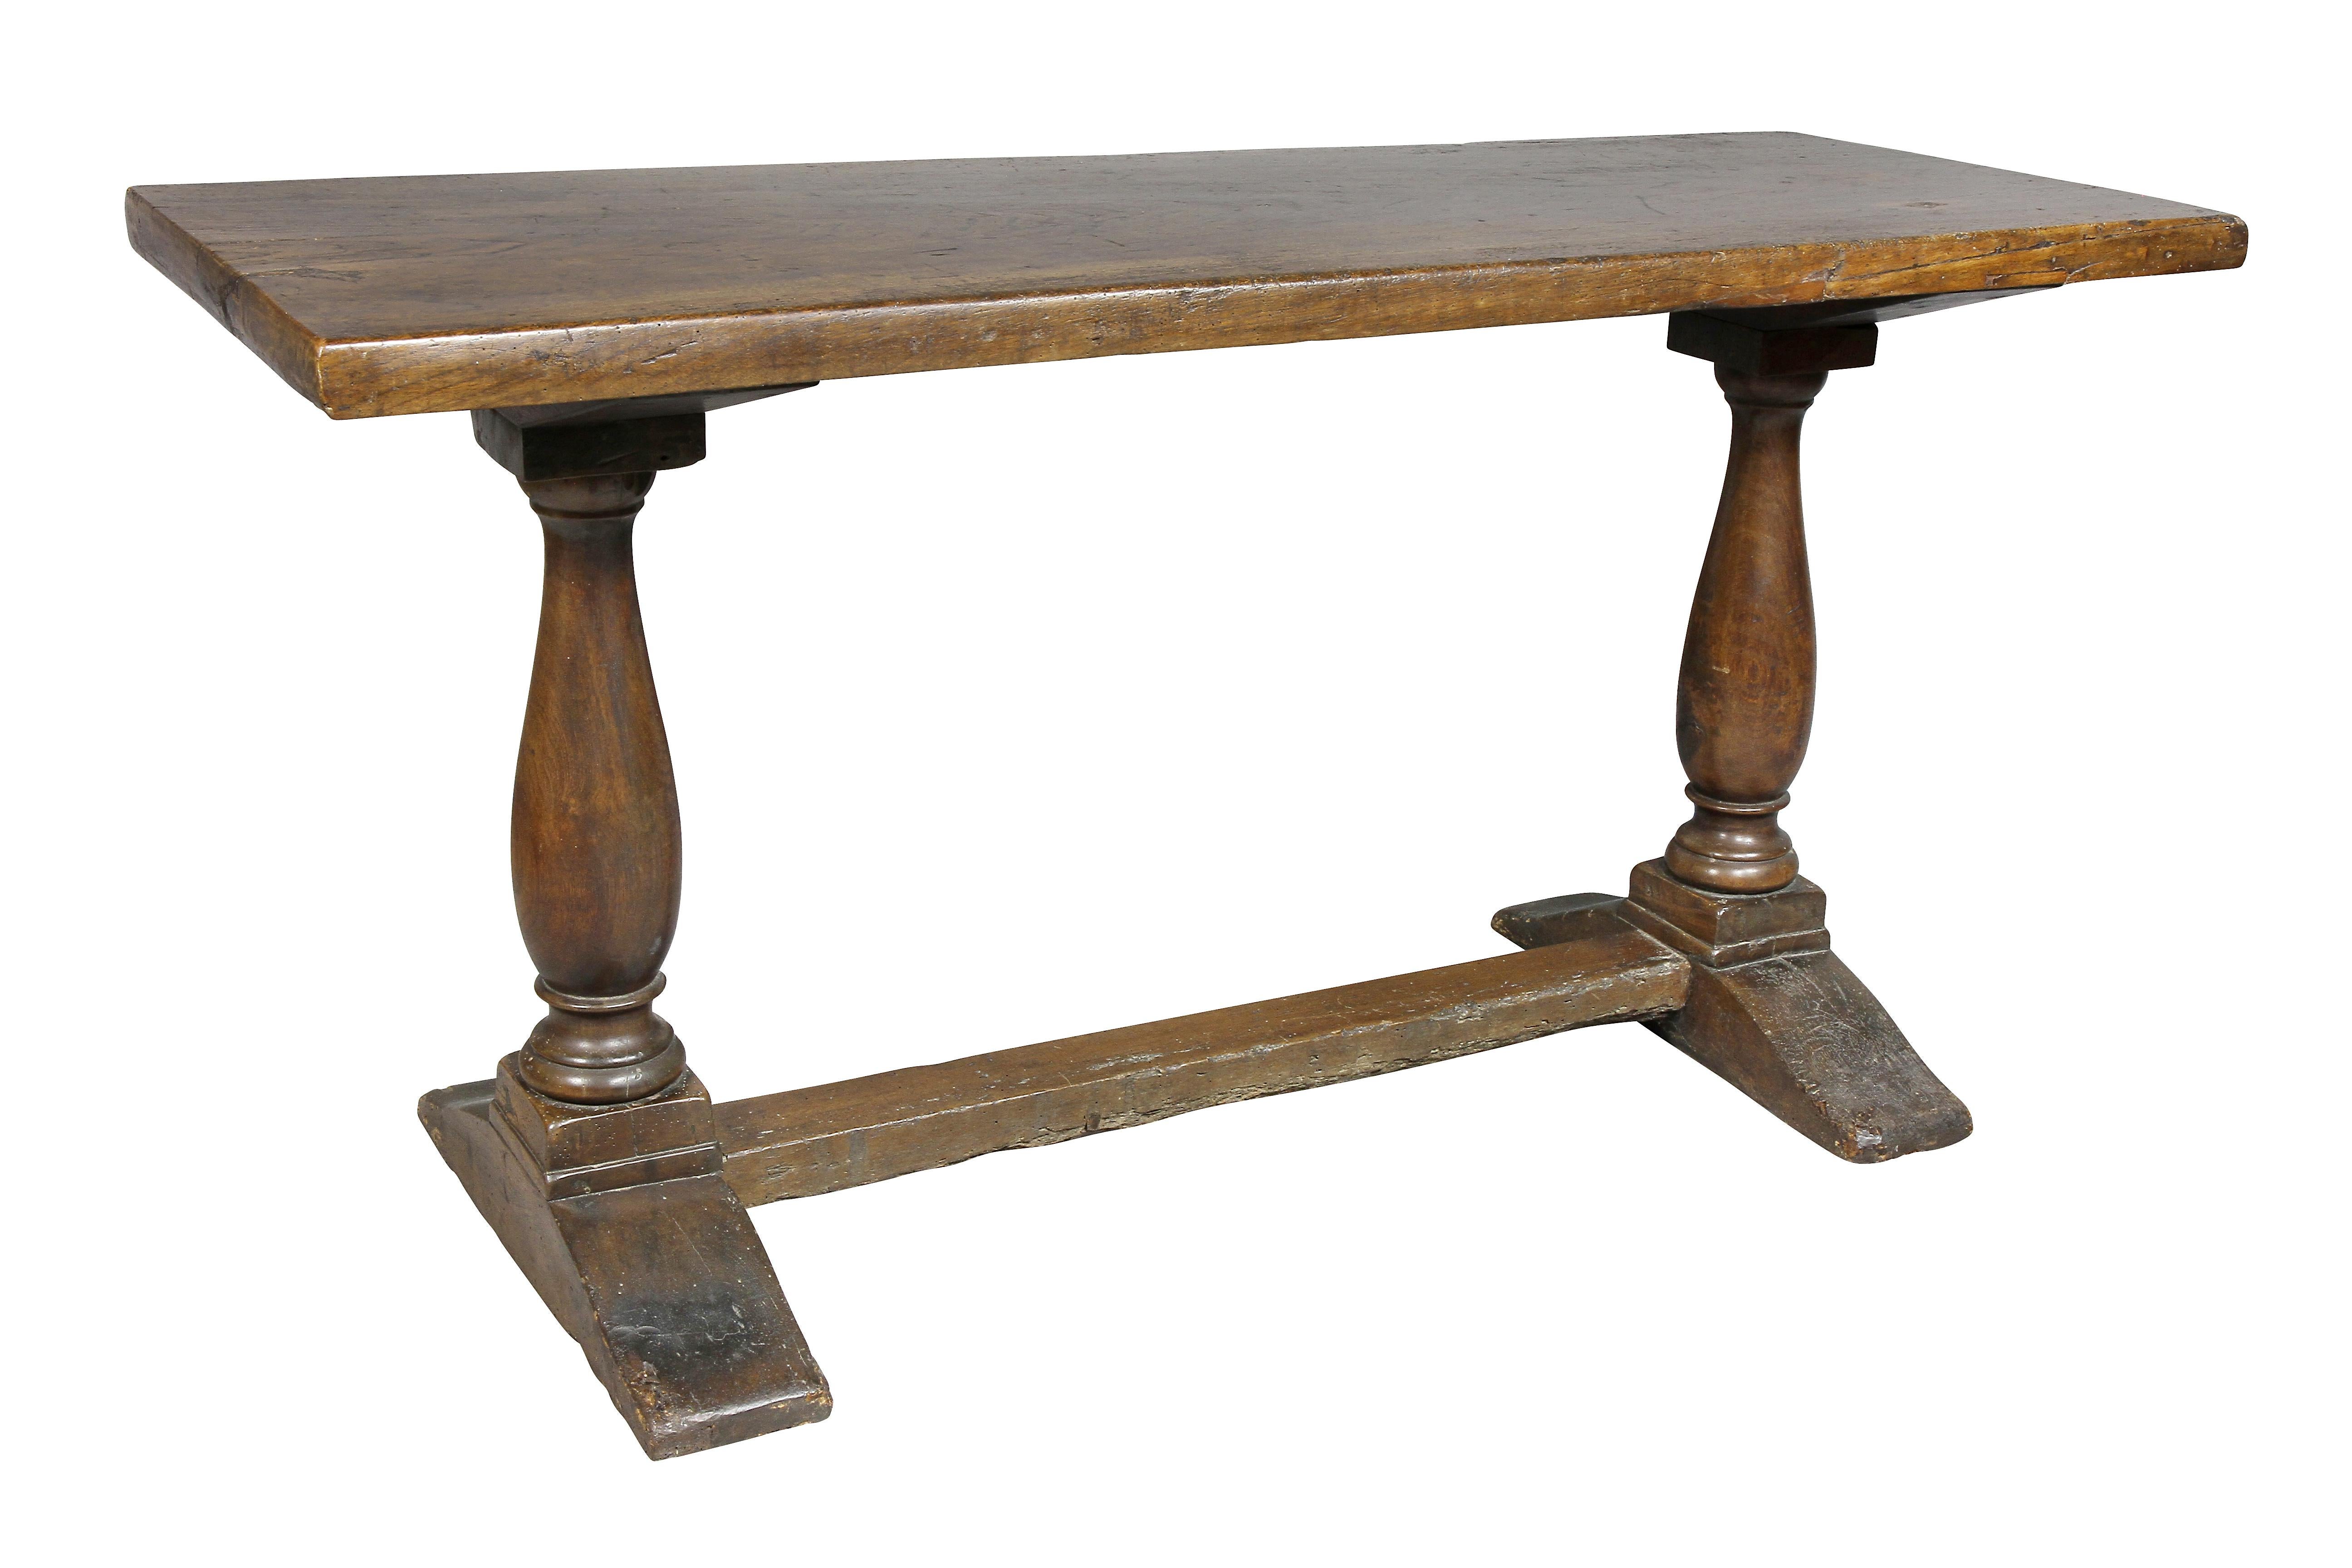 Rectangular single board top over a trestle form base comprising two turned columns joined by a stretcher, shoe feet.